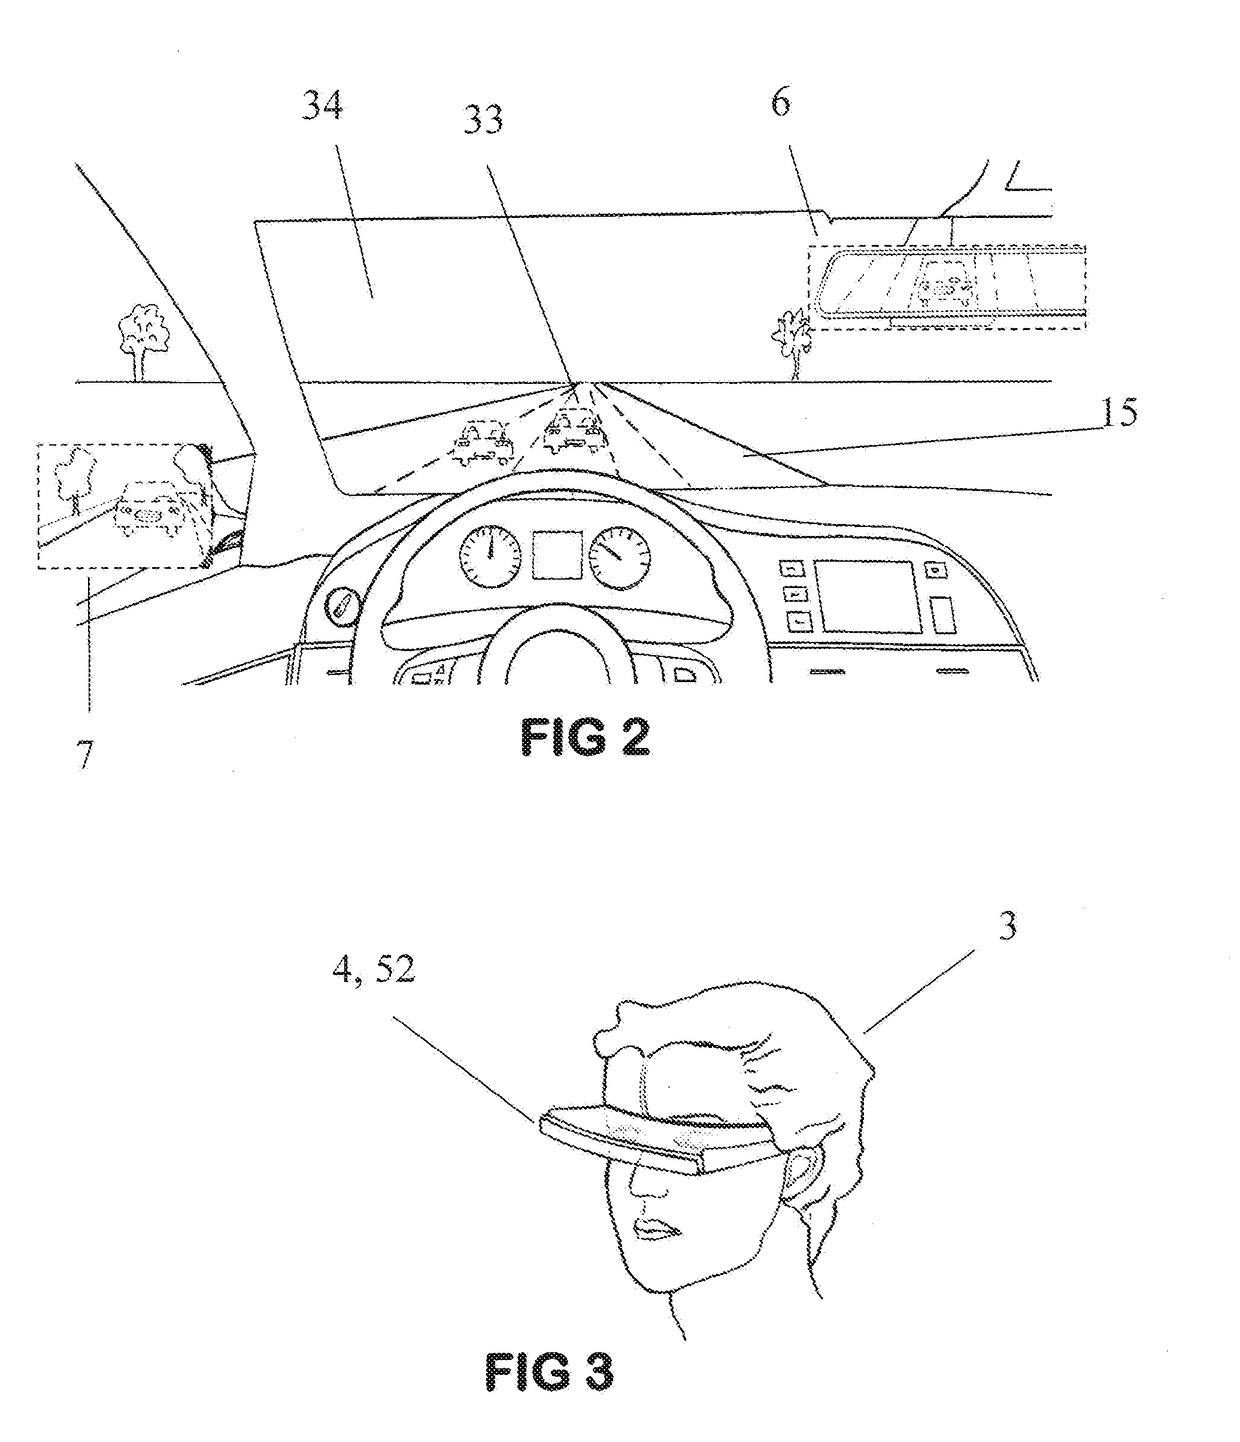 Driver Education System And Method For Training In Simulated Road Emeregencies